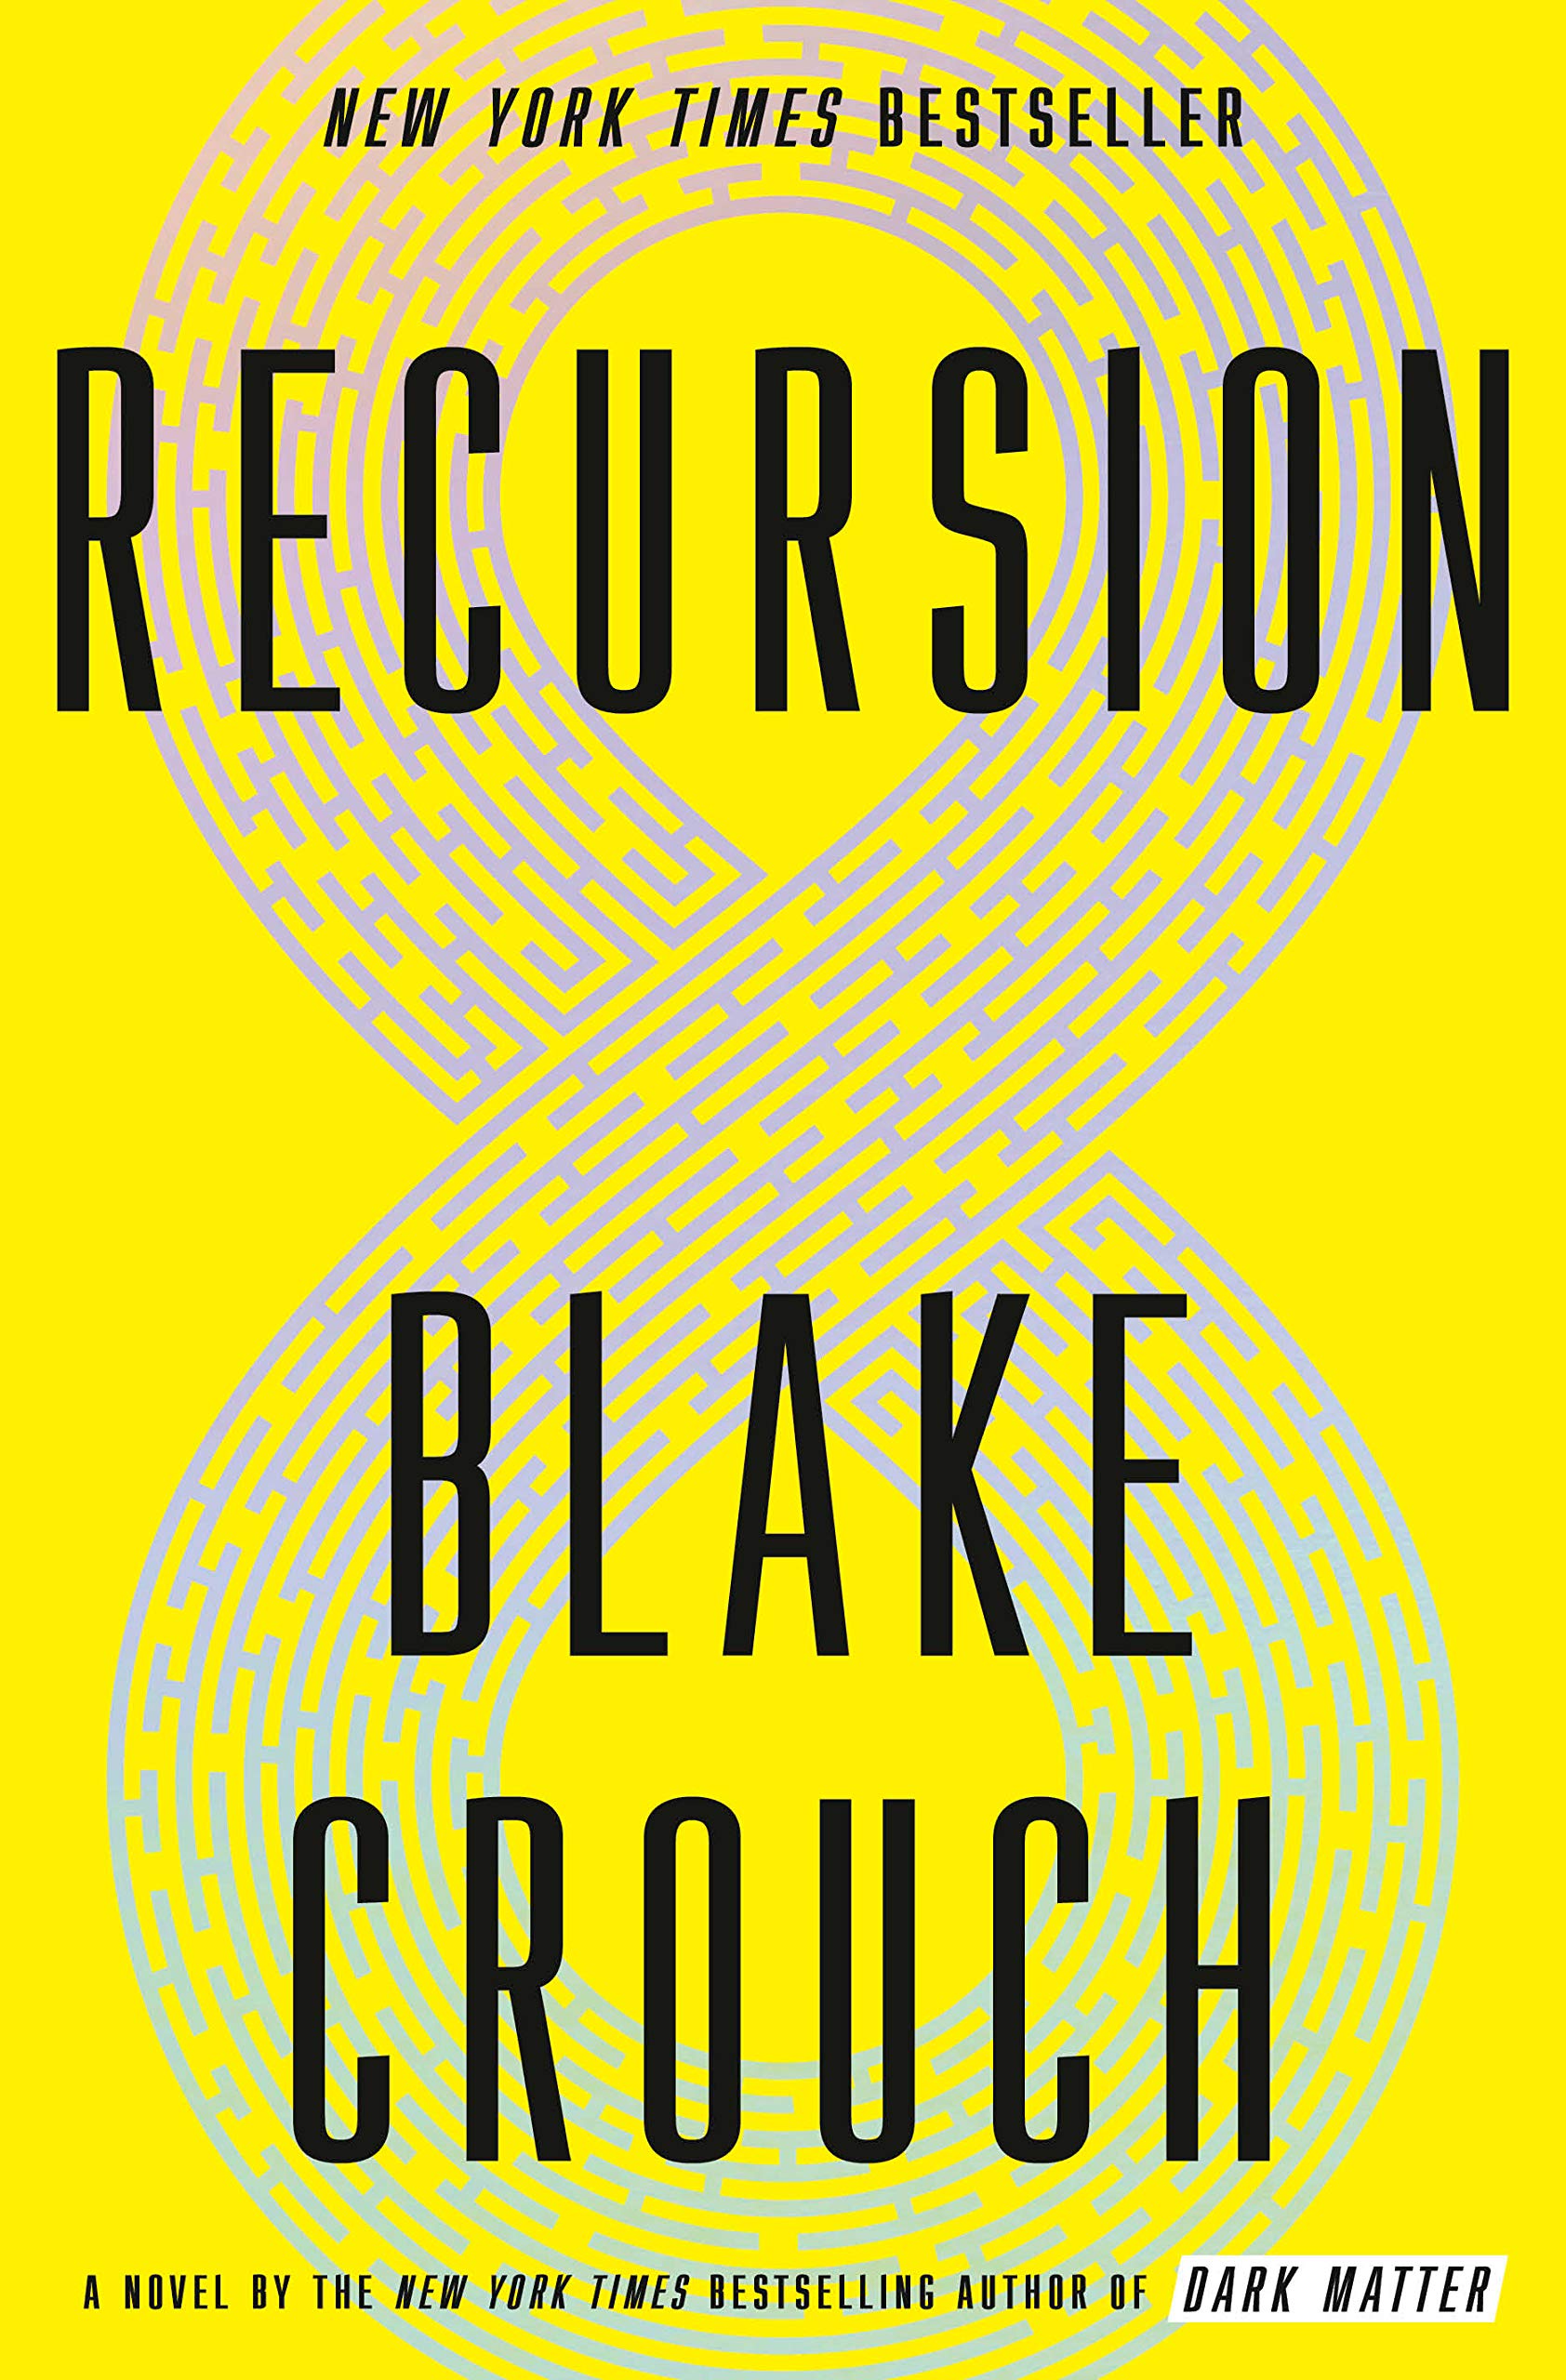 book cover: Recursion by Blake Crouch